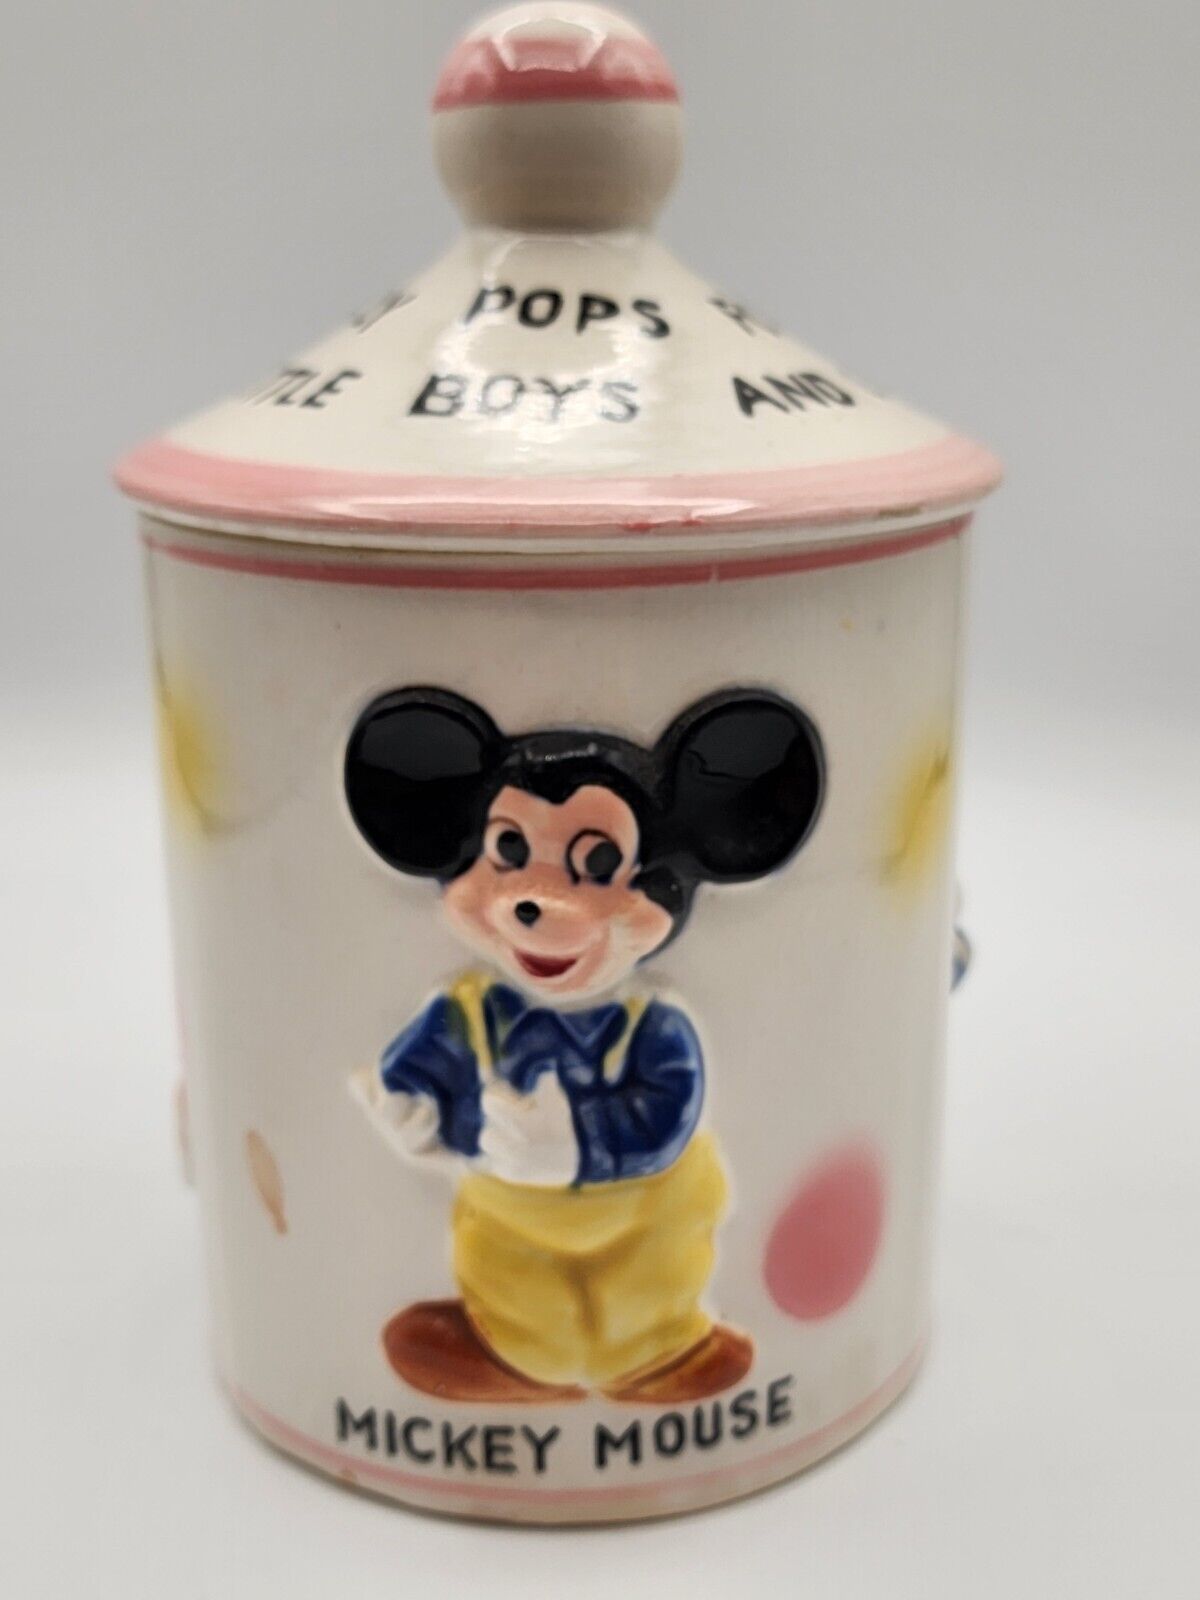 Rare 1961 Cookie Jar MICKEY MOUSE LOLLY POPS Donald Duck BRECHNER Pink Trim NICE